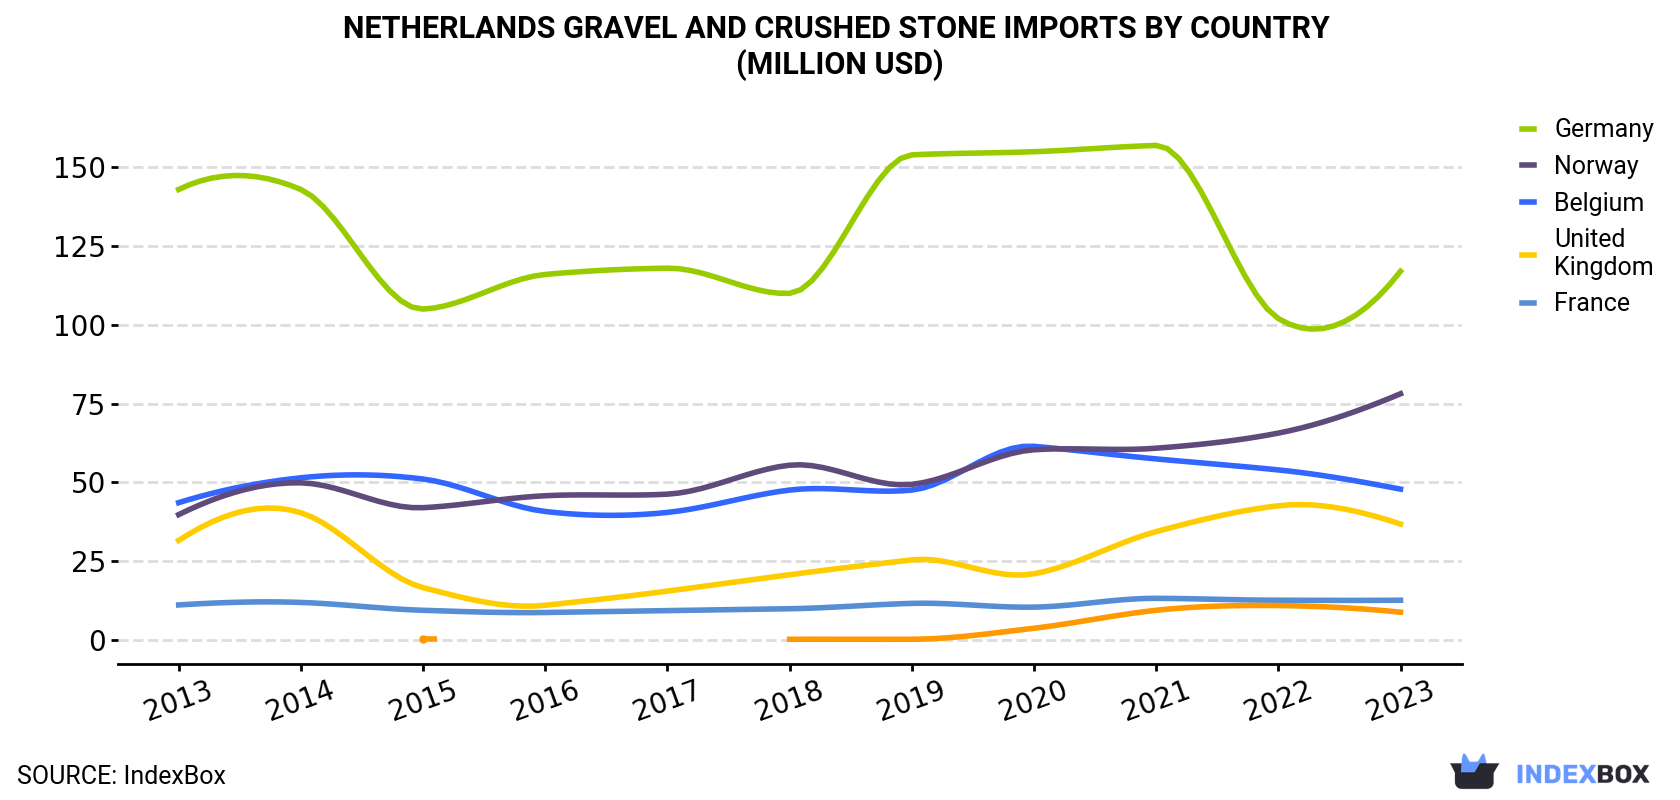 Netherlands Gravel and Crushed Stone Imports By Country (Million USD)